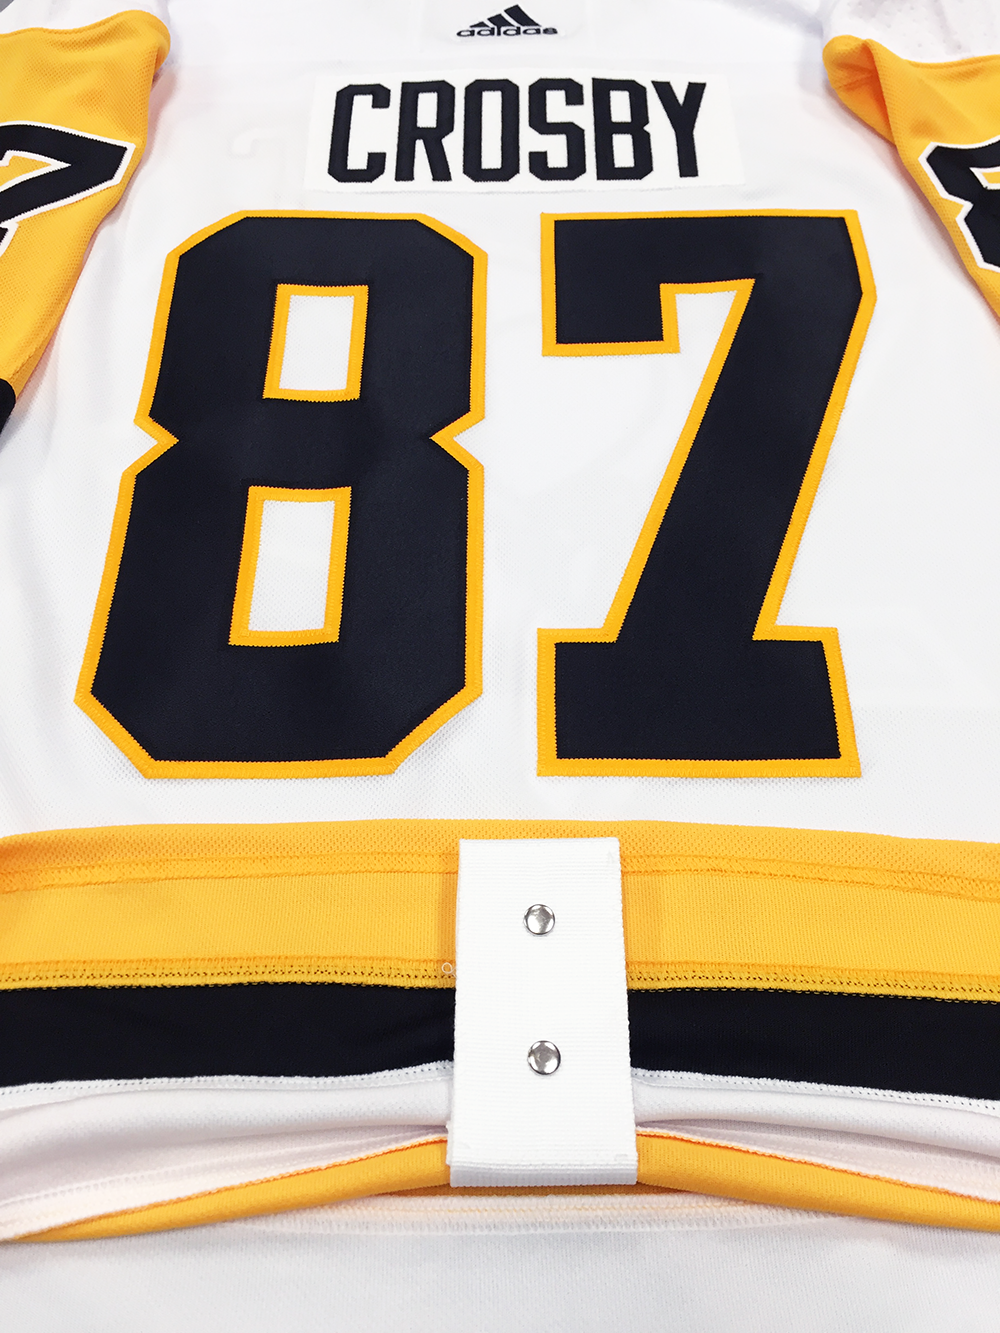 sidney crosby jersey for sale